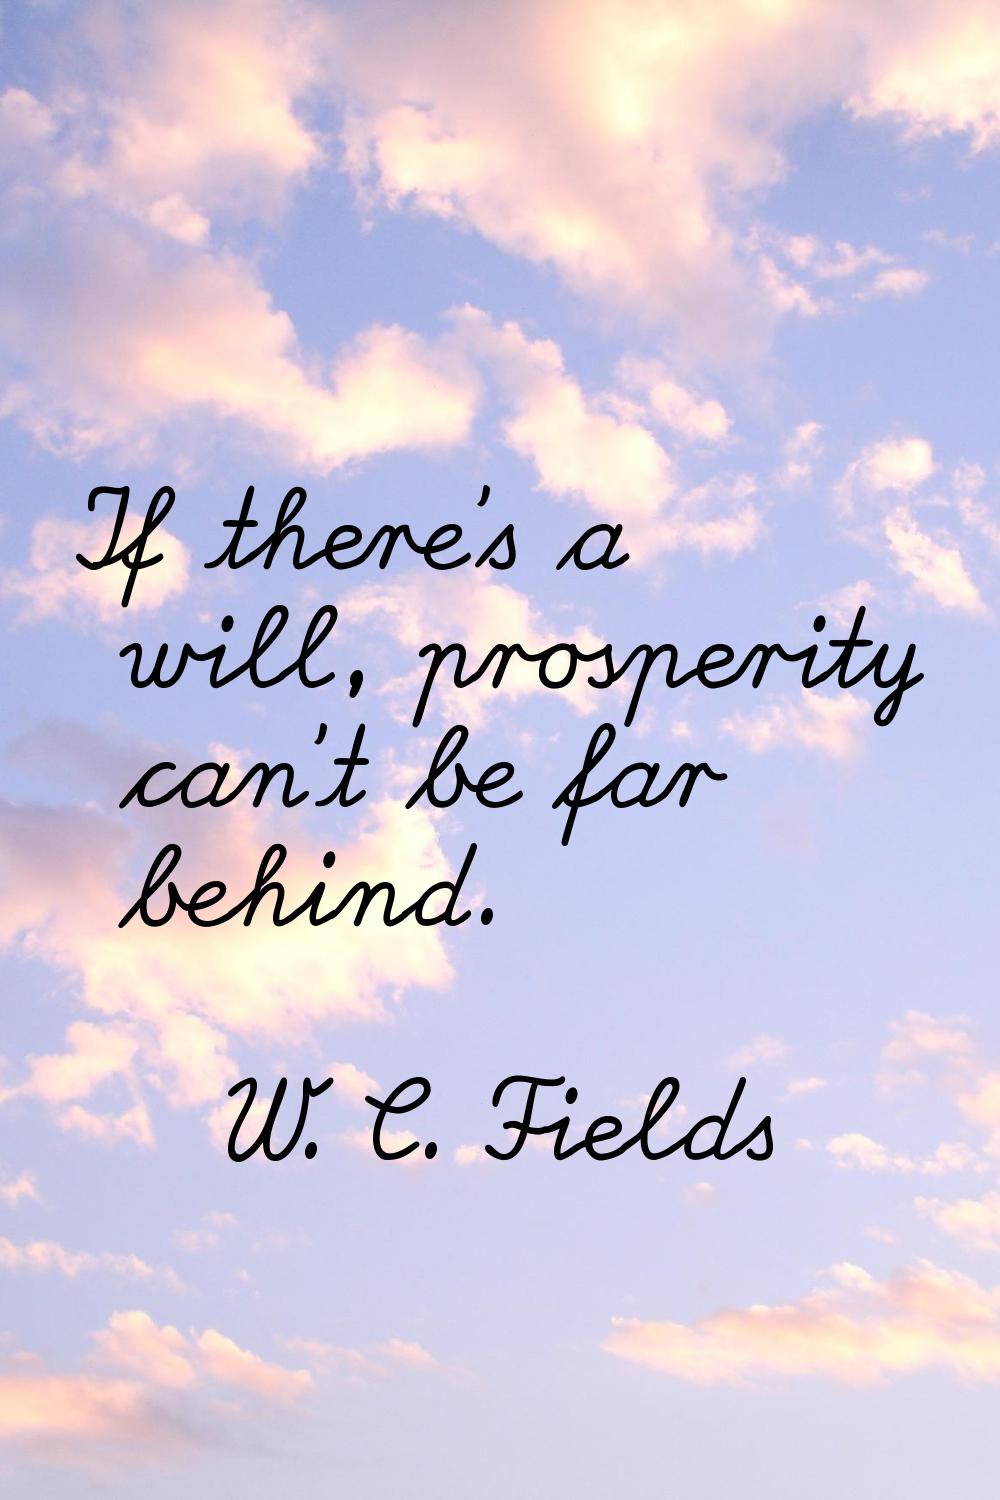 If there's a will, prosperity can't be far behind.